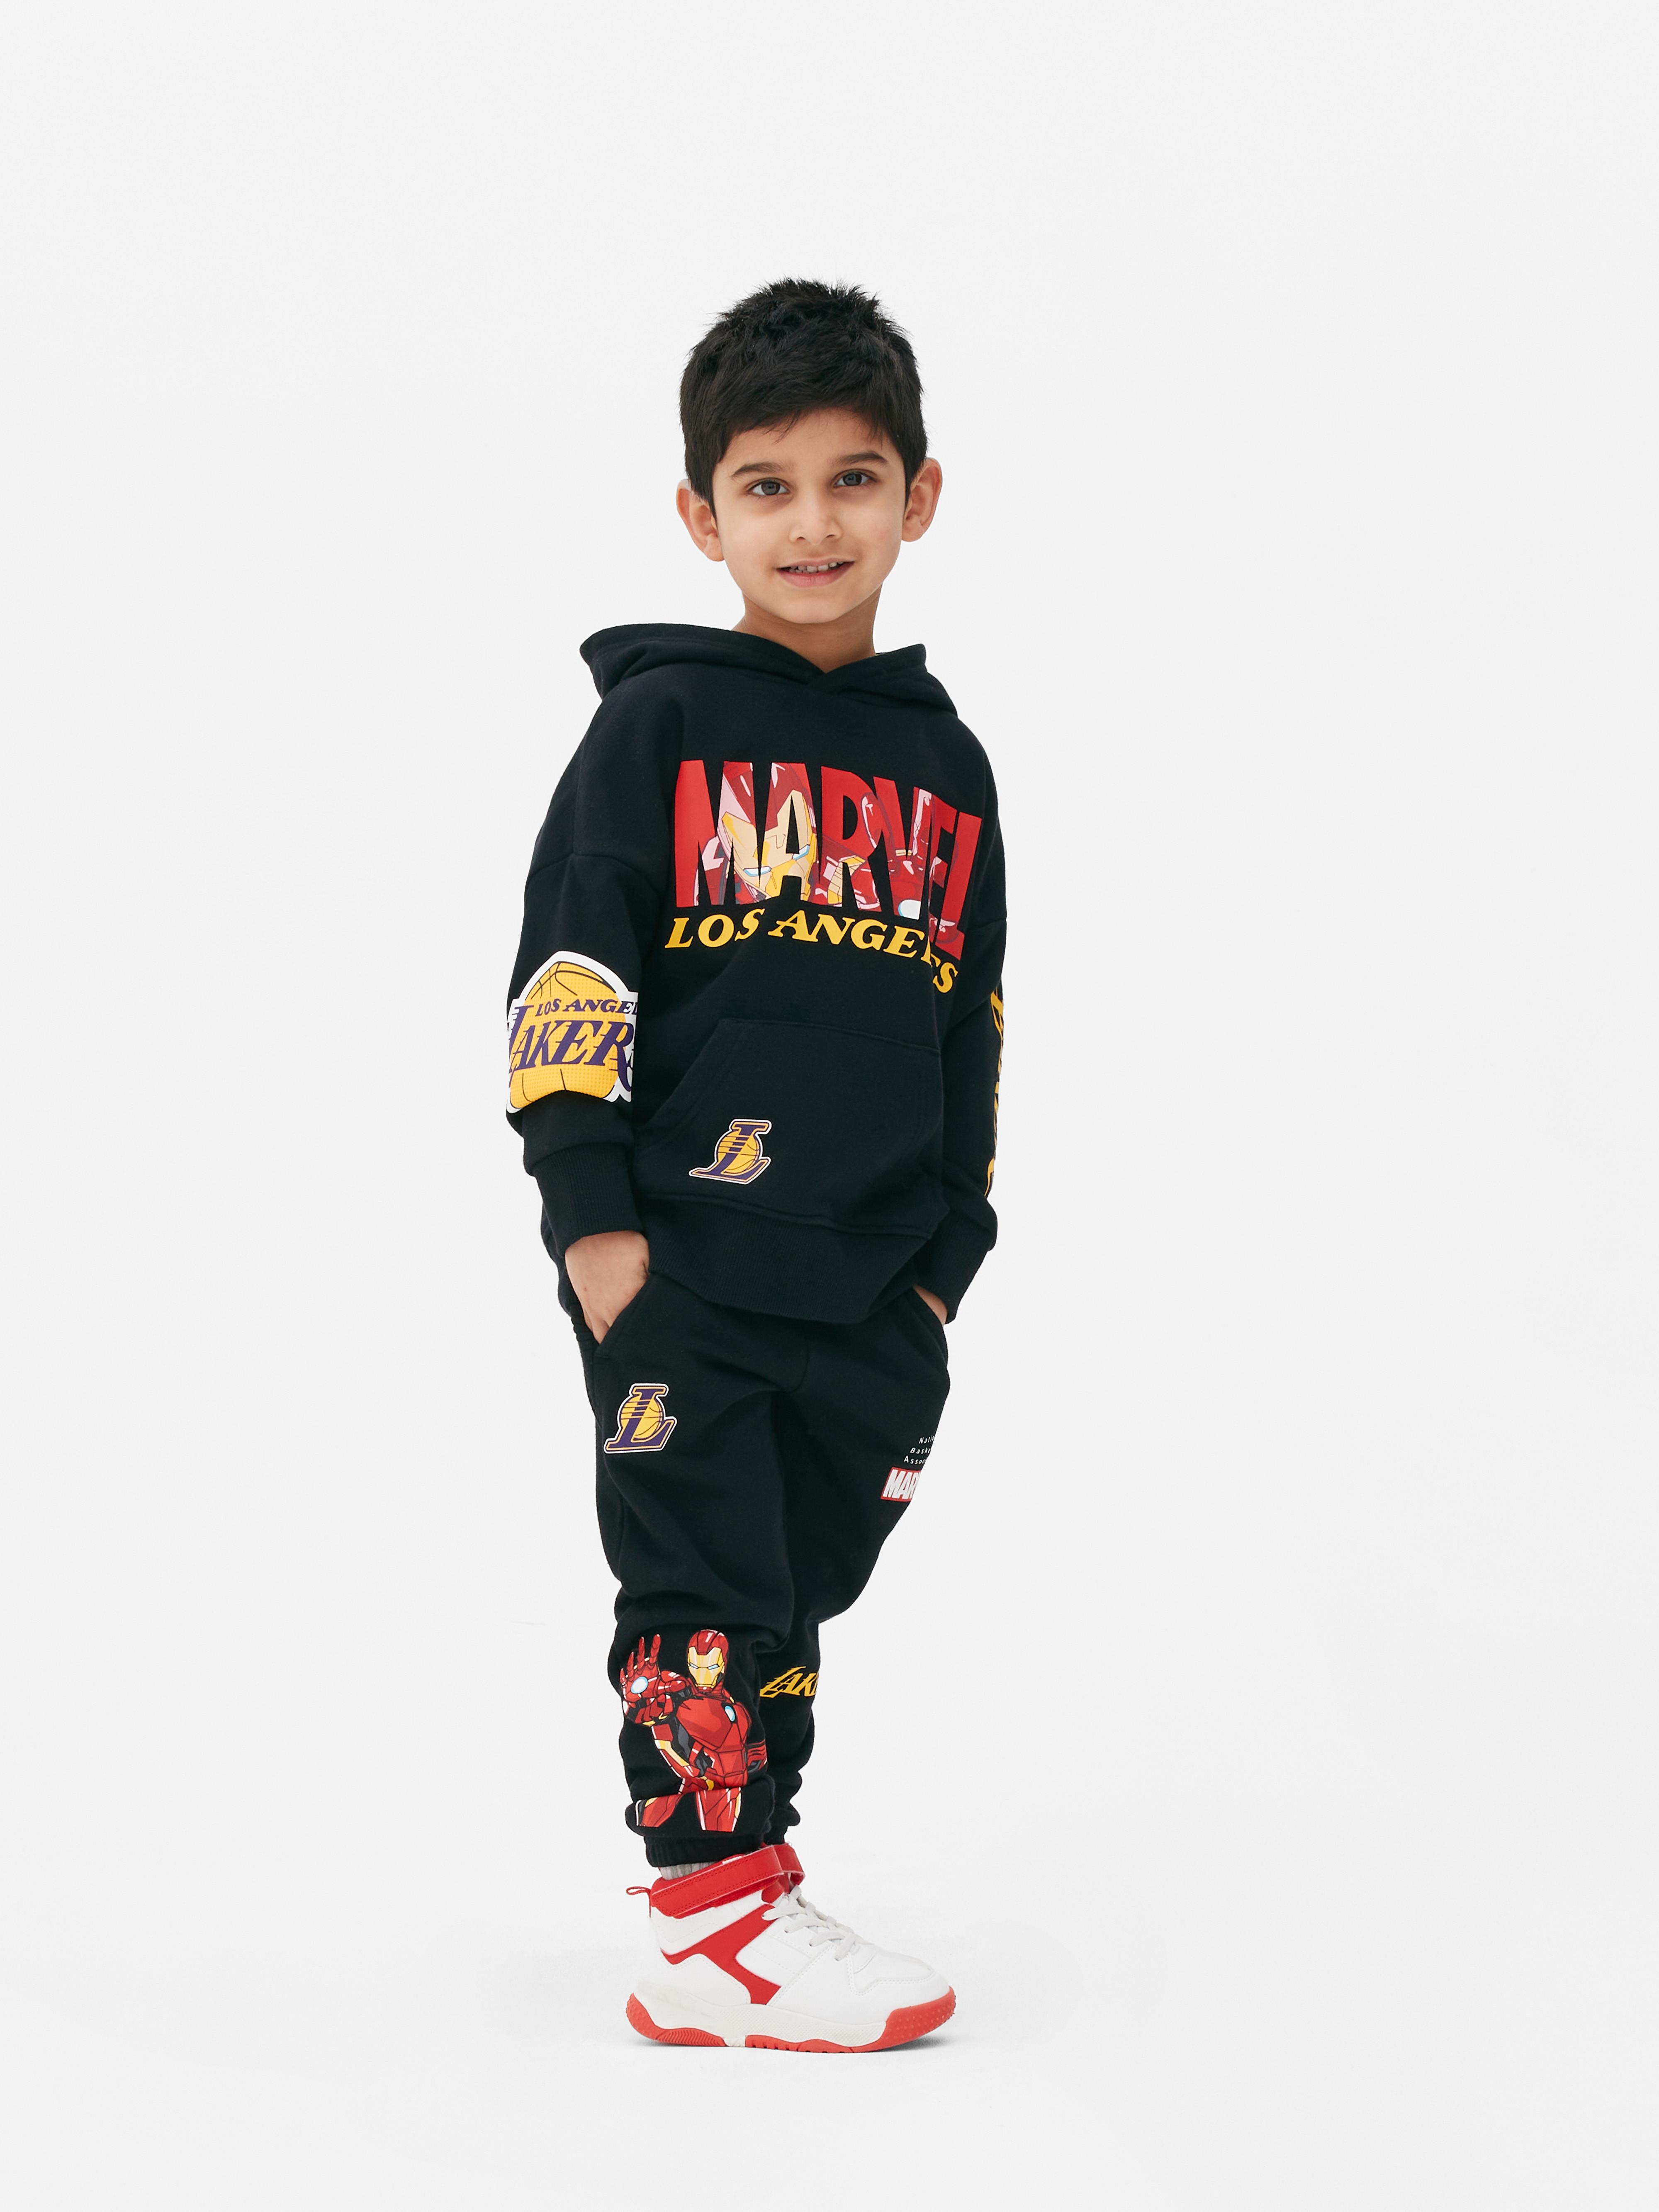 NBA & Marvel Kids' Clothing and Accessories